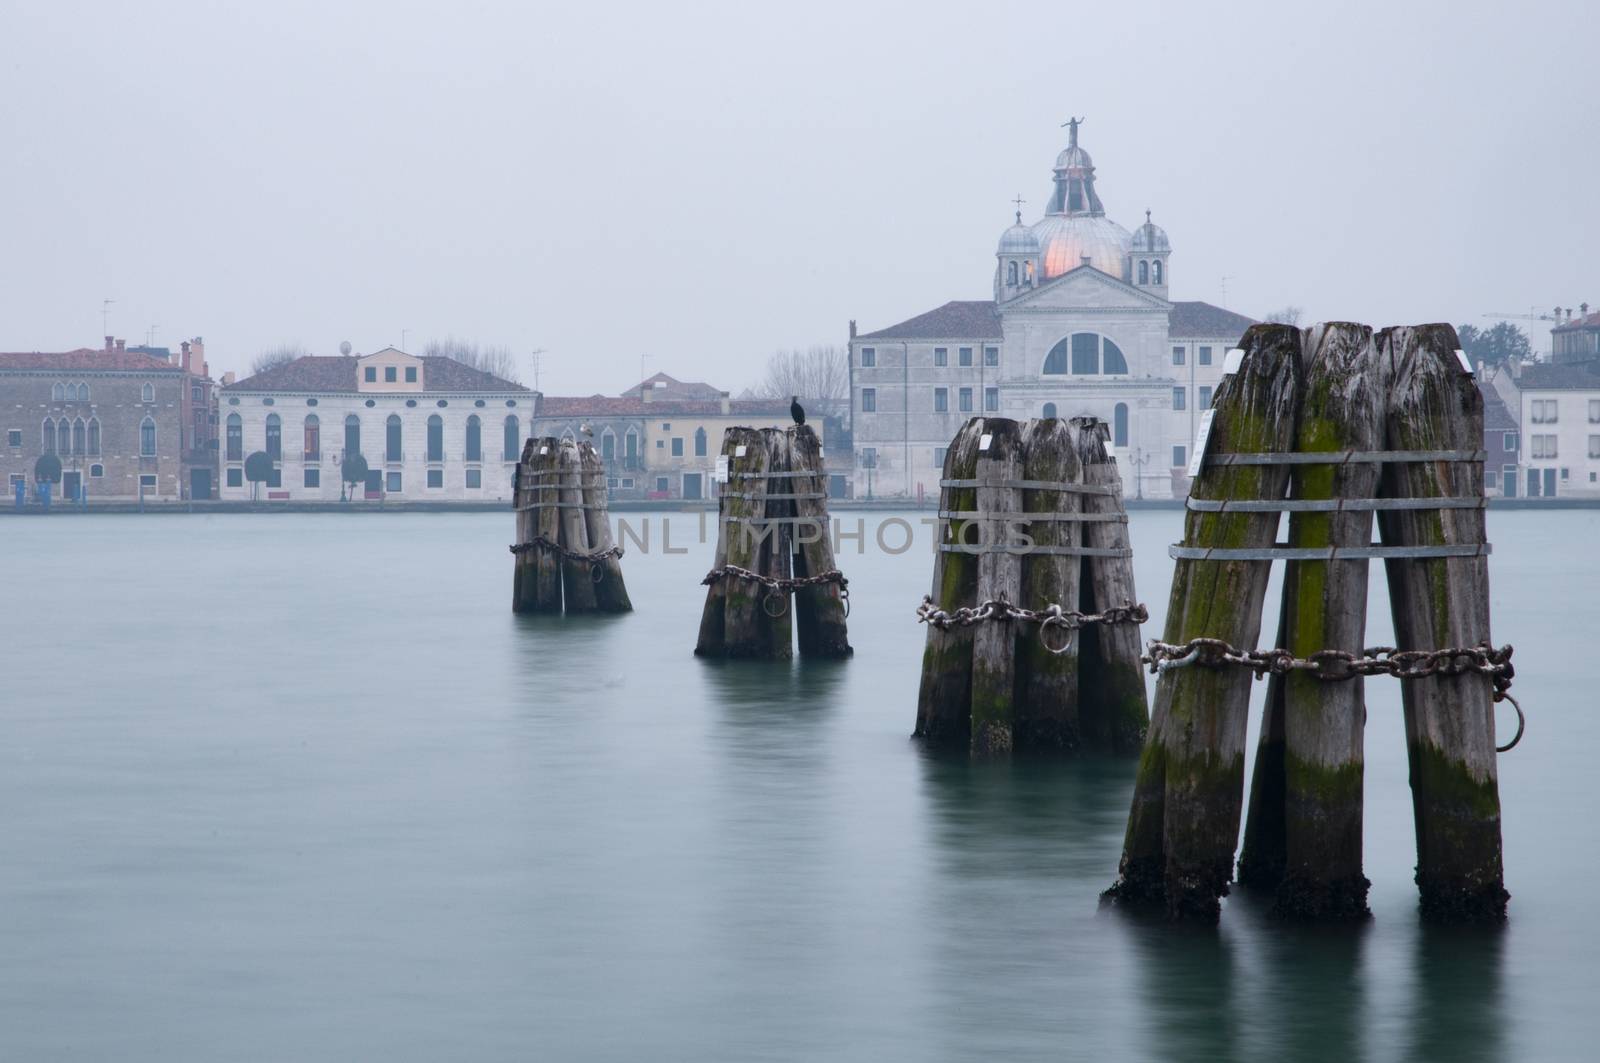 Giudecca channel in Venice early in the morning by Haspion